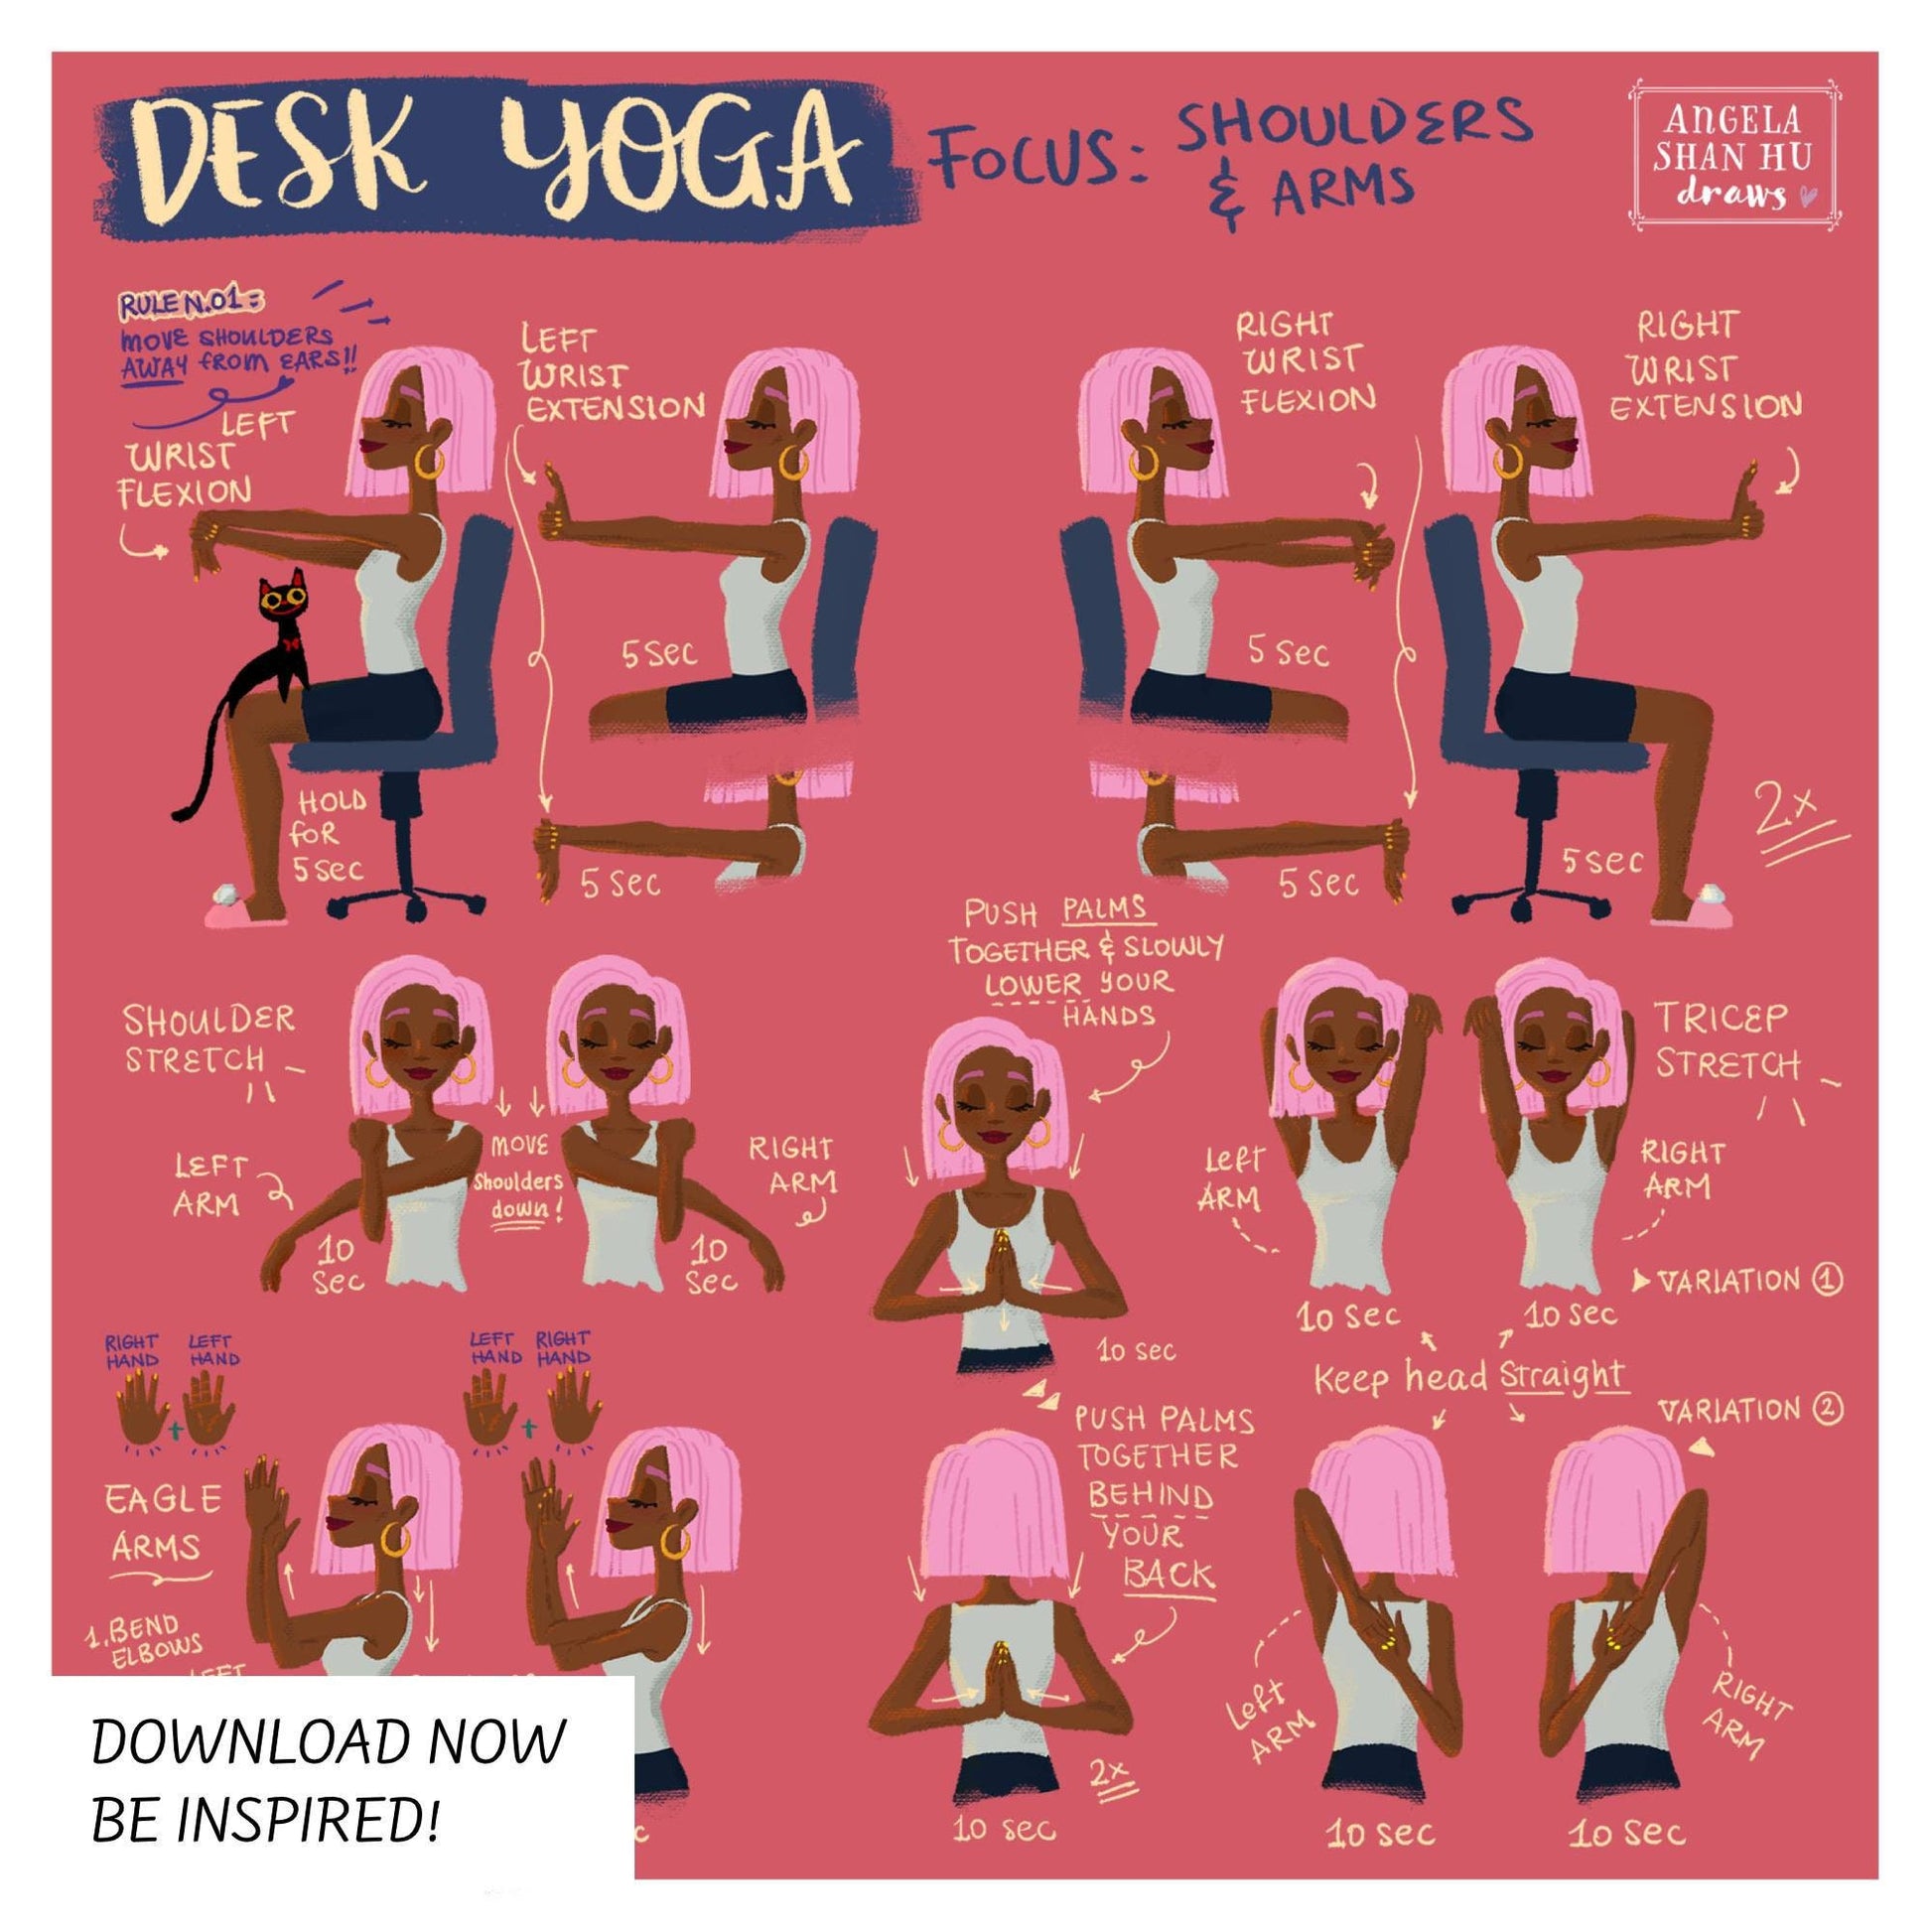 Easy Yoga Asana: Poses And Stretches For Office And Workplace